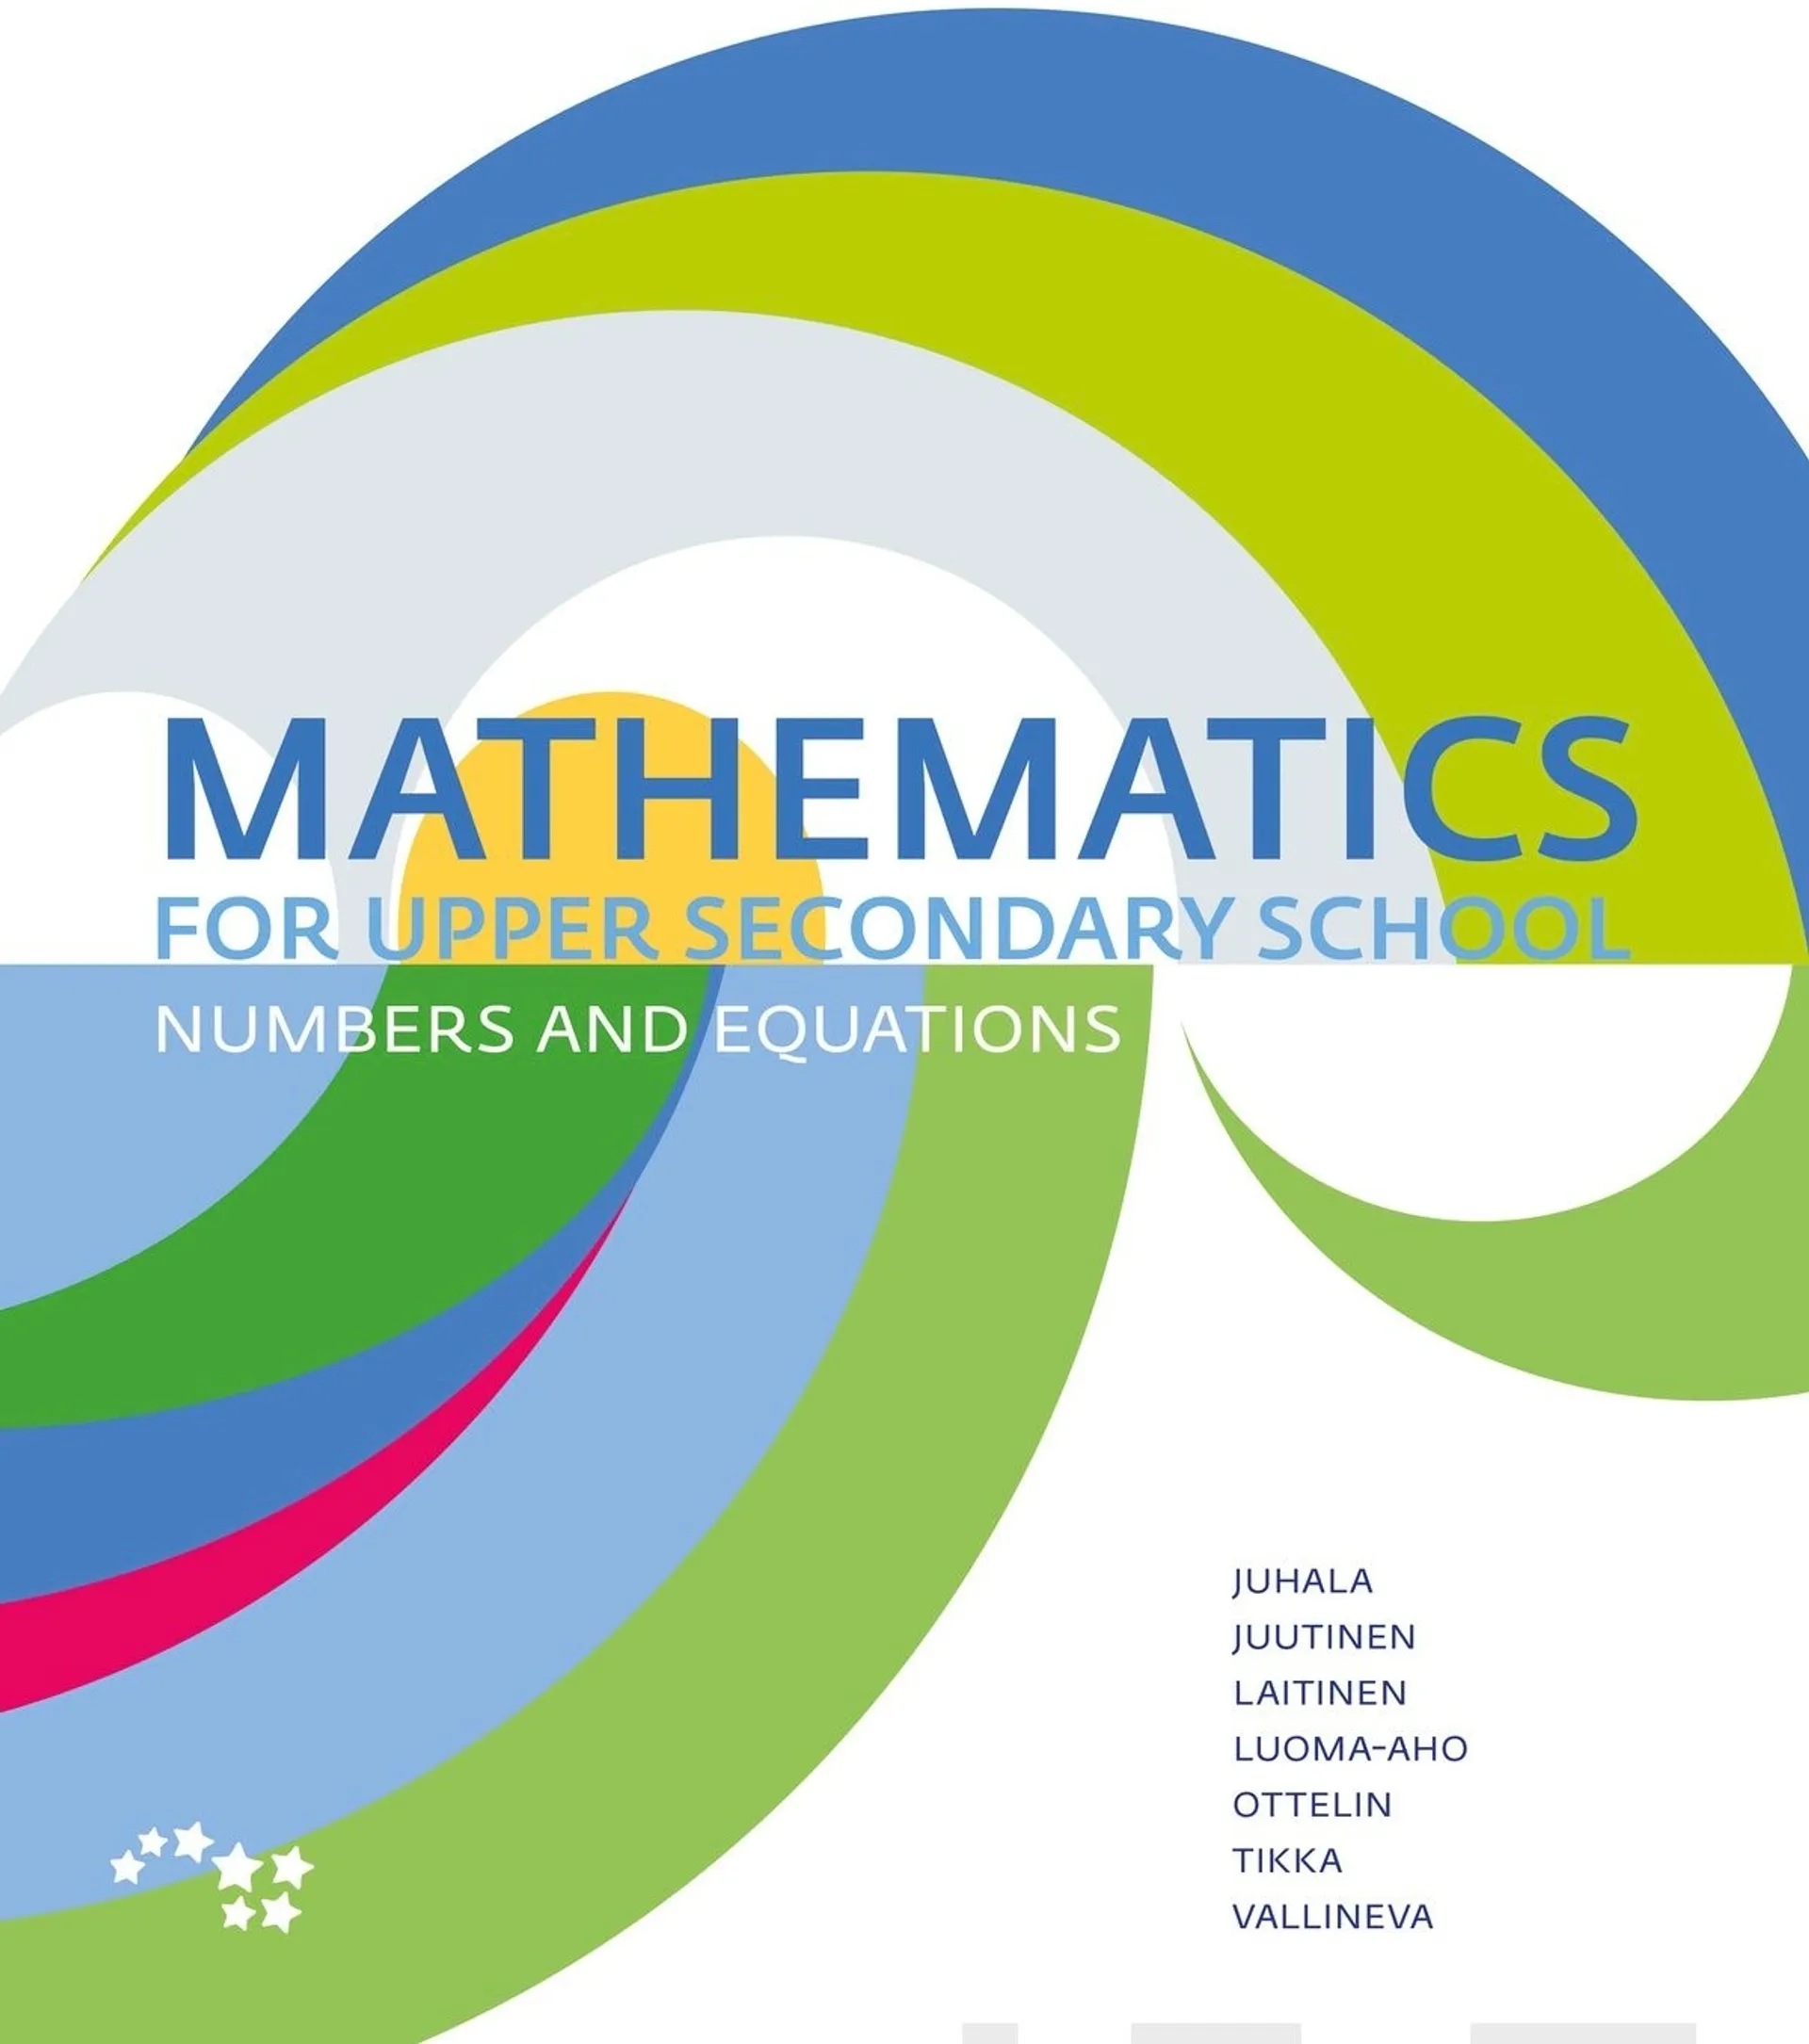 Juhala, Mathematics for Upper Secondary School 1 - Numbers and Equations